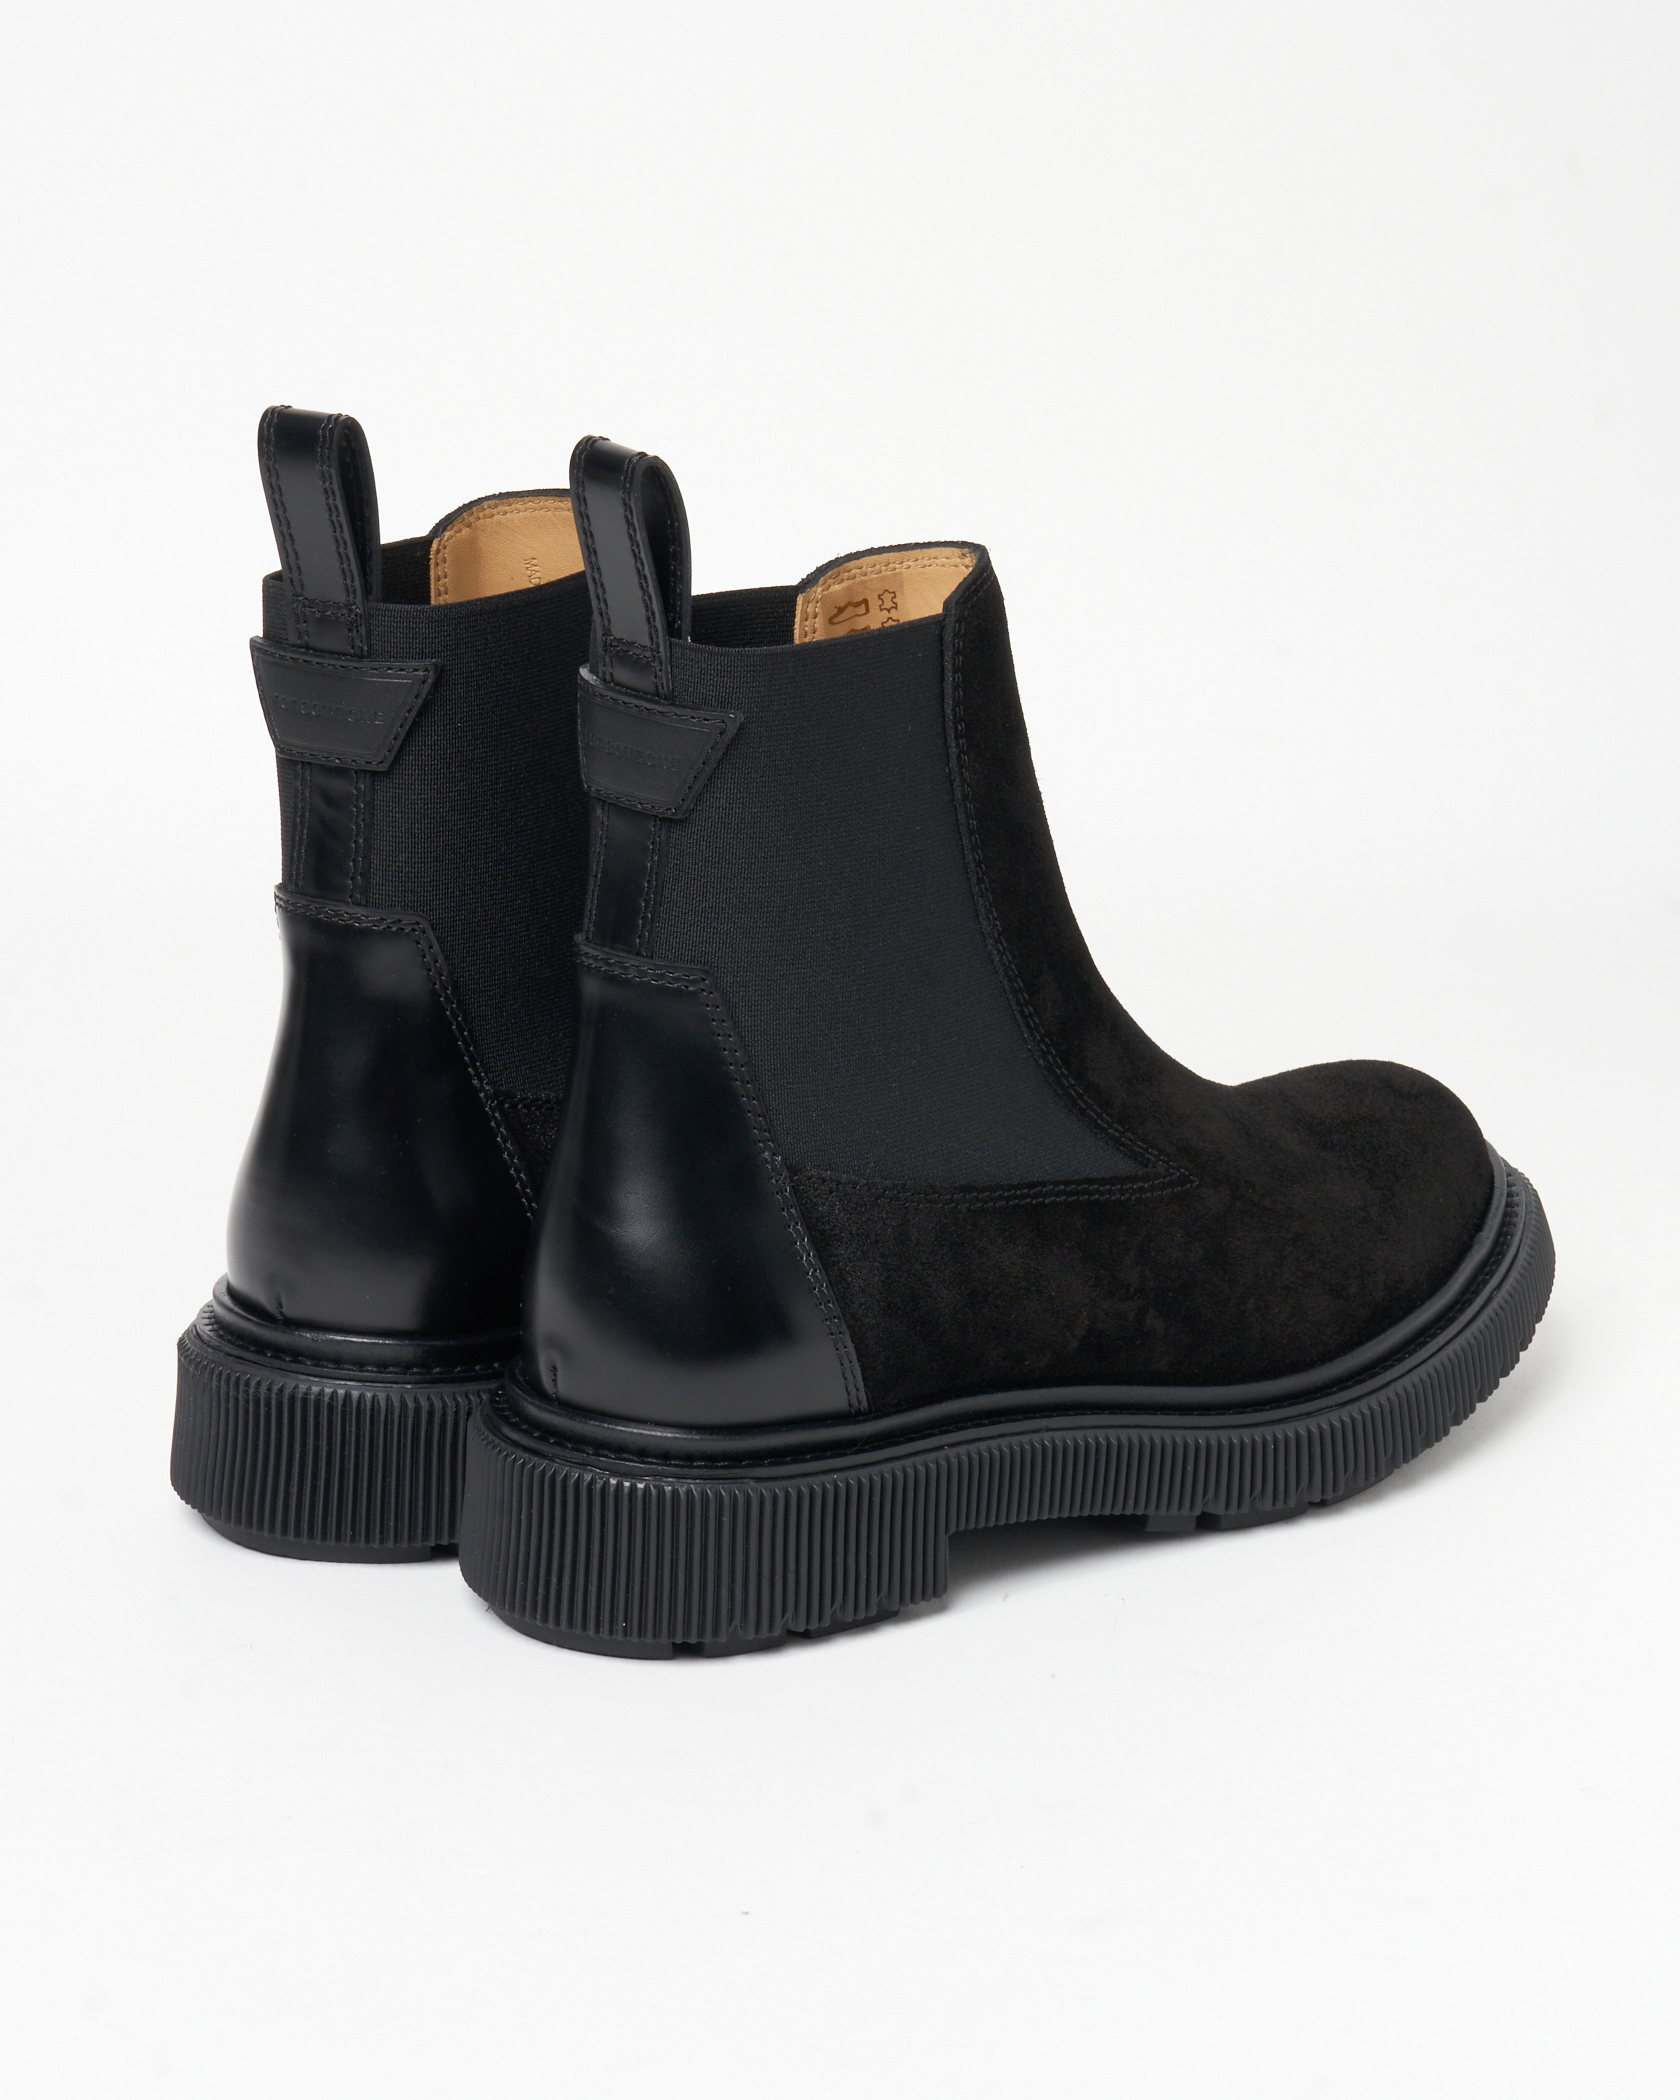 ADIEU×FORSOMEONE CHELSEA BOOTS | FORSOMEONE(フォー